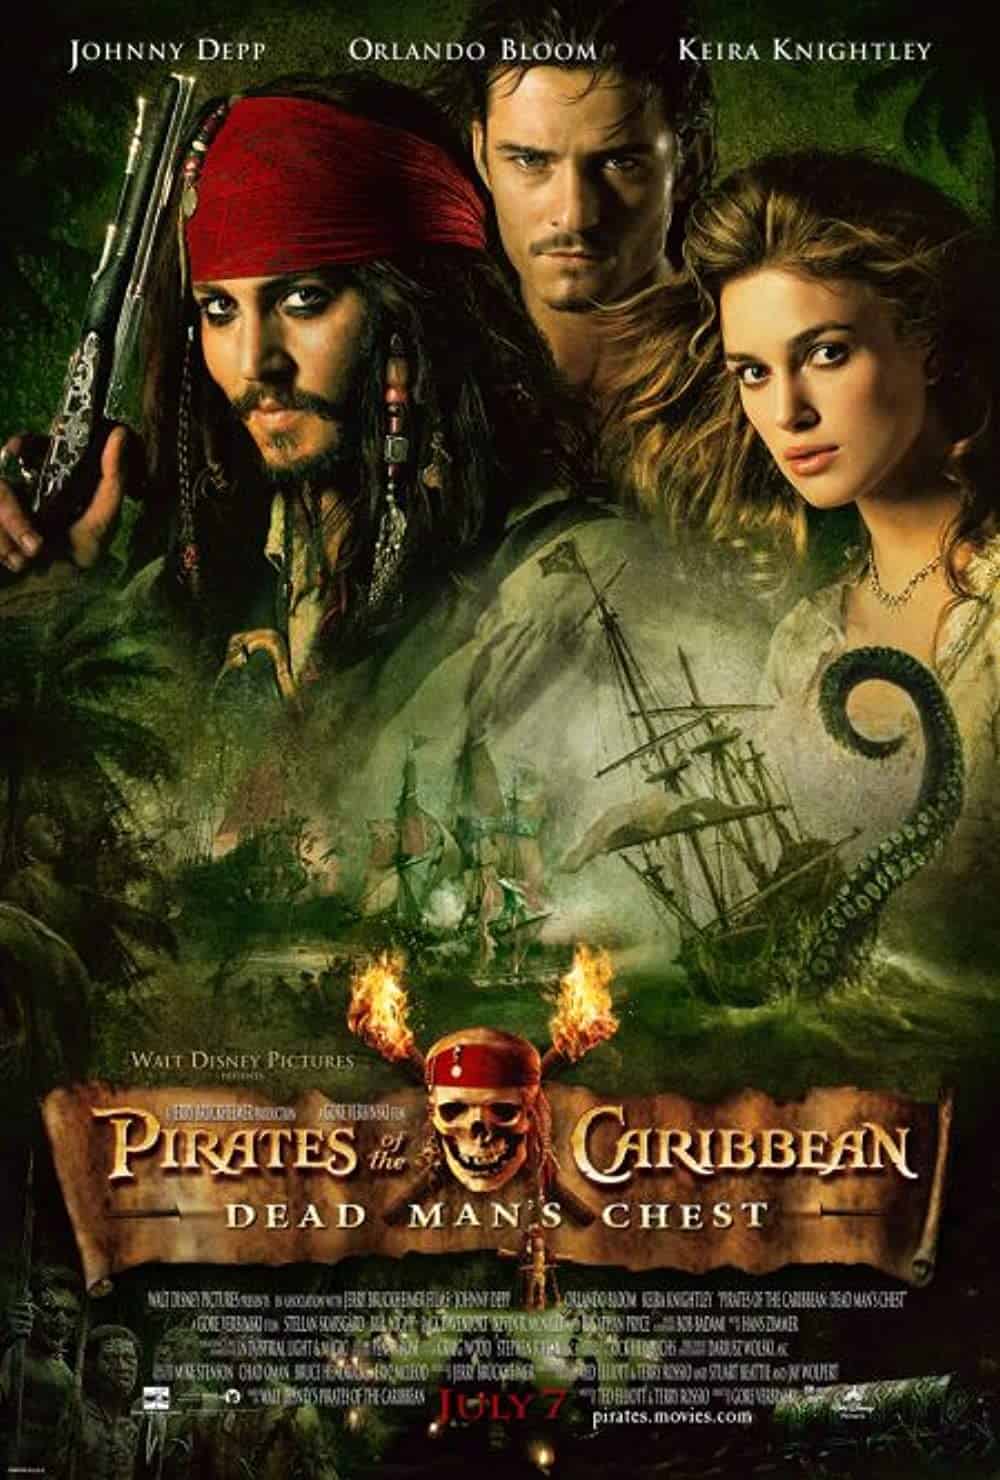 Pirates of the Caribbean Dead Man's Chest(2006)